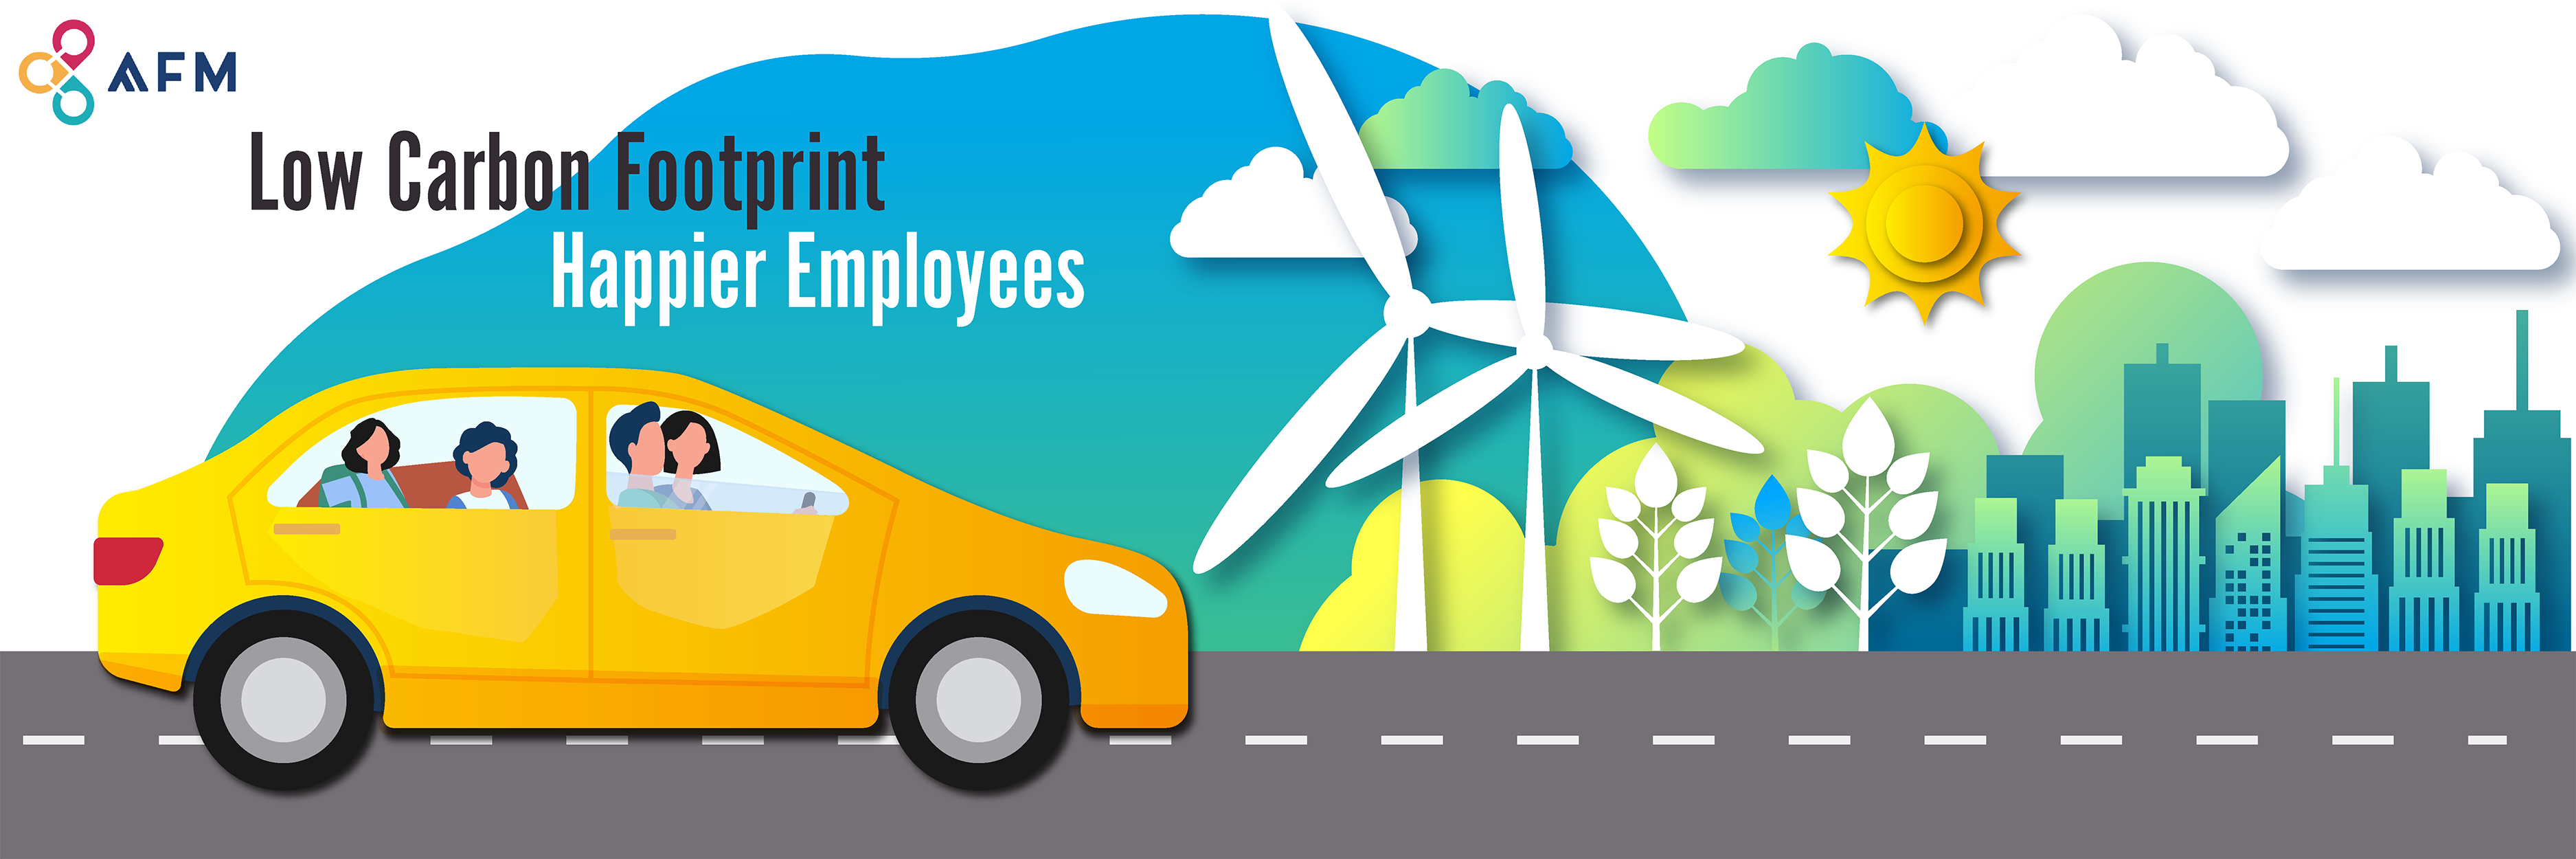 The-No-One-Fleet-Management-Solution-for-Lower-Carbon-Footprint-and-Happier-Employees